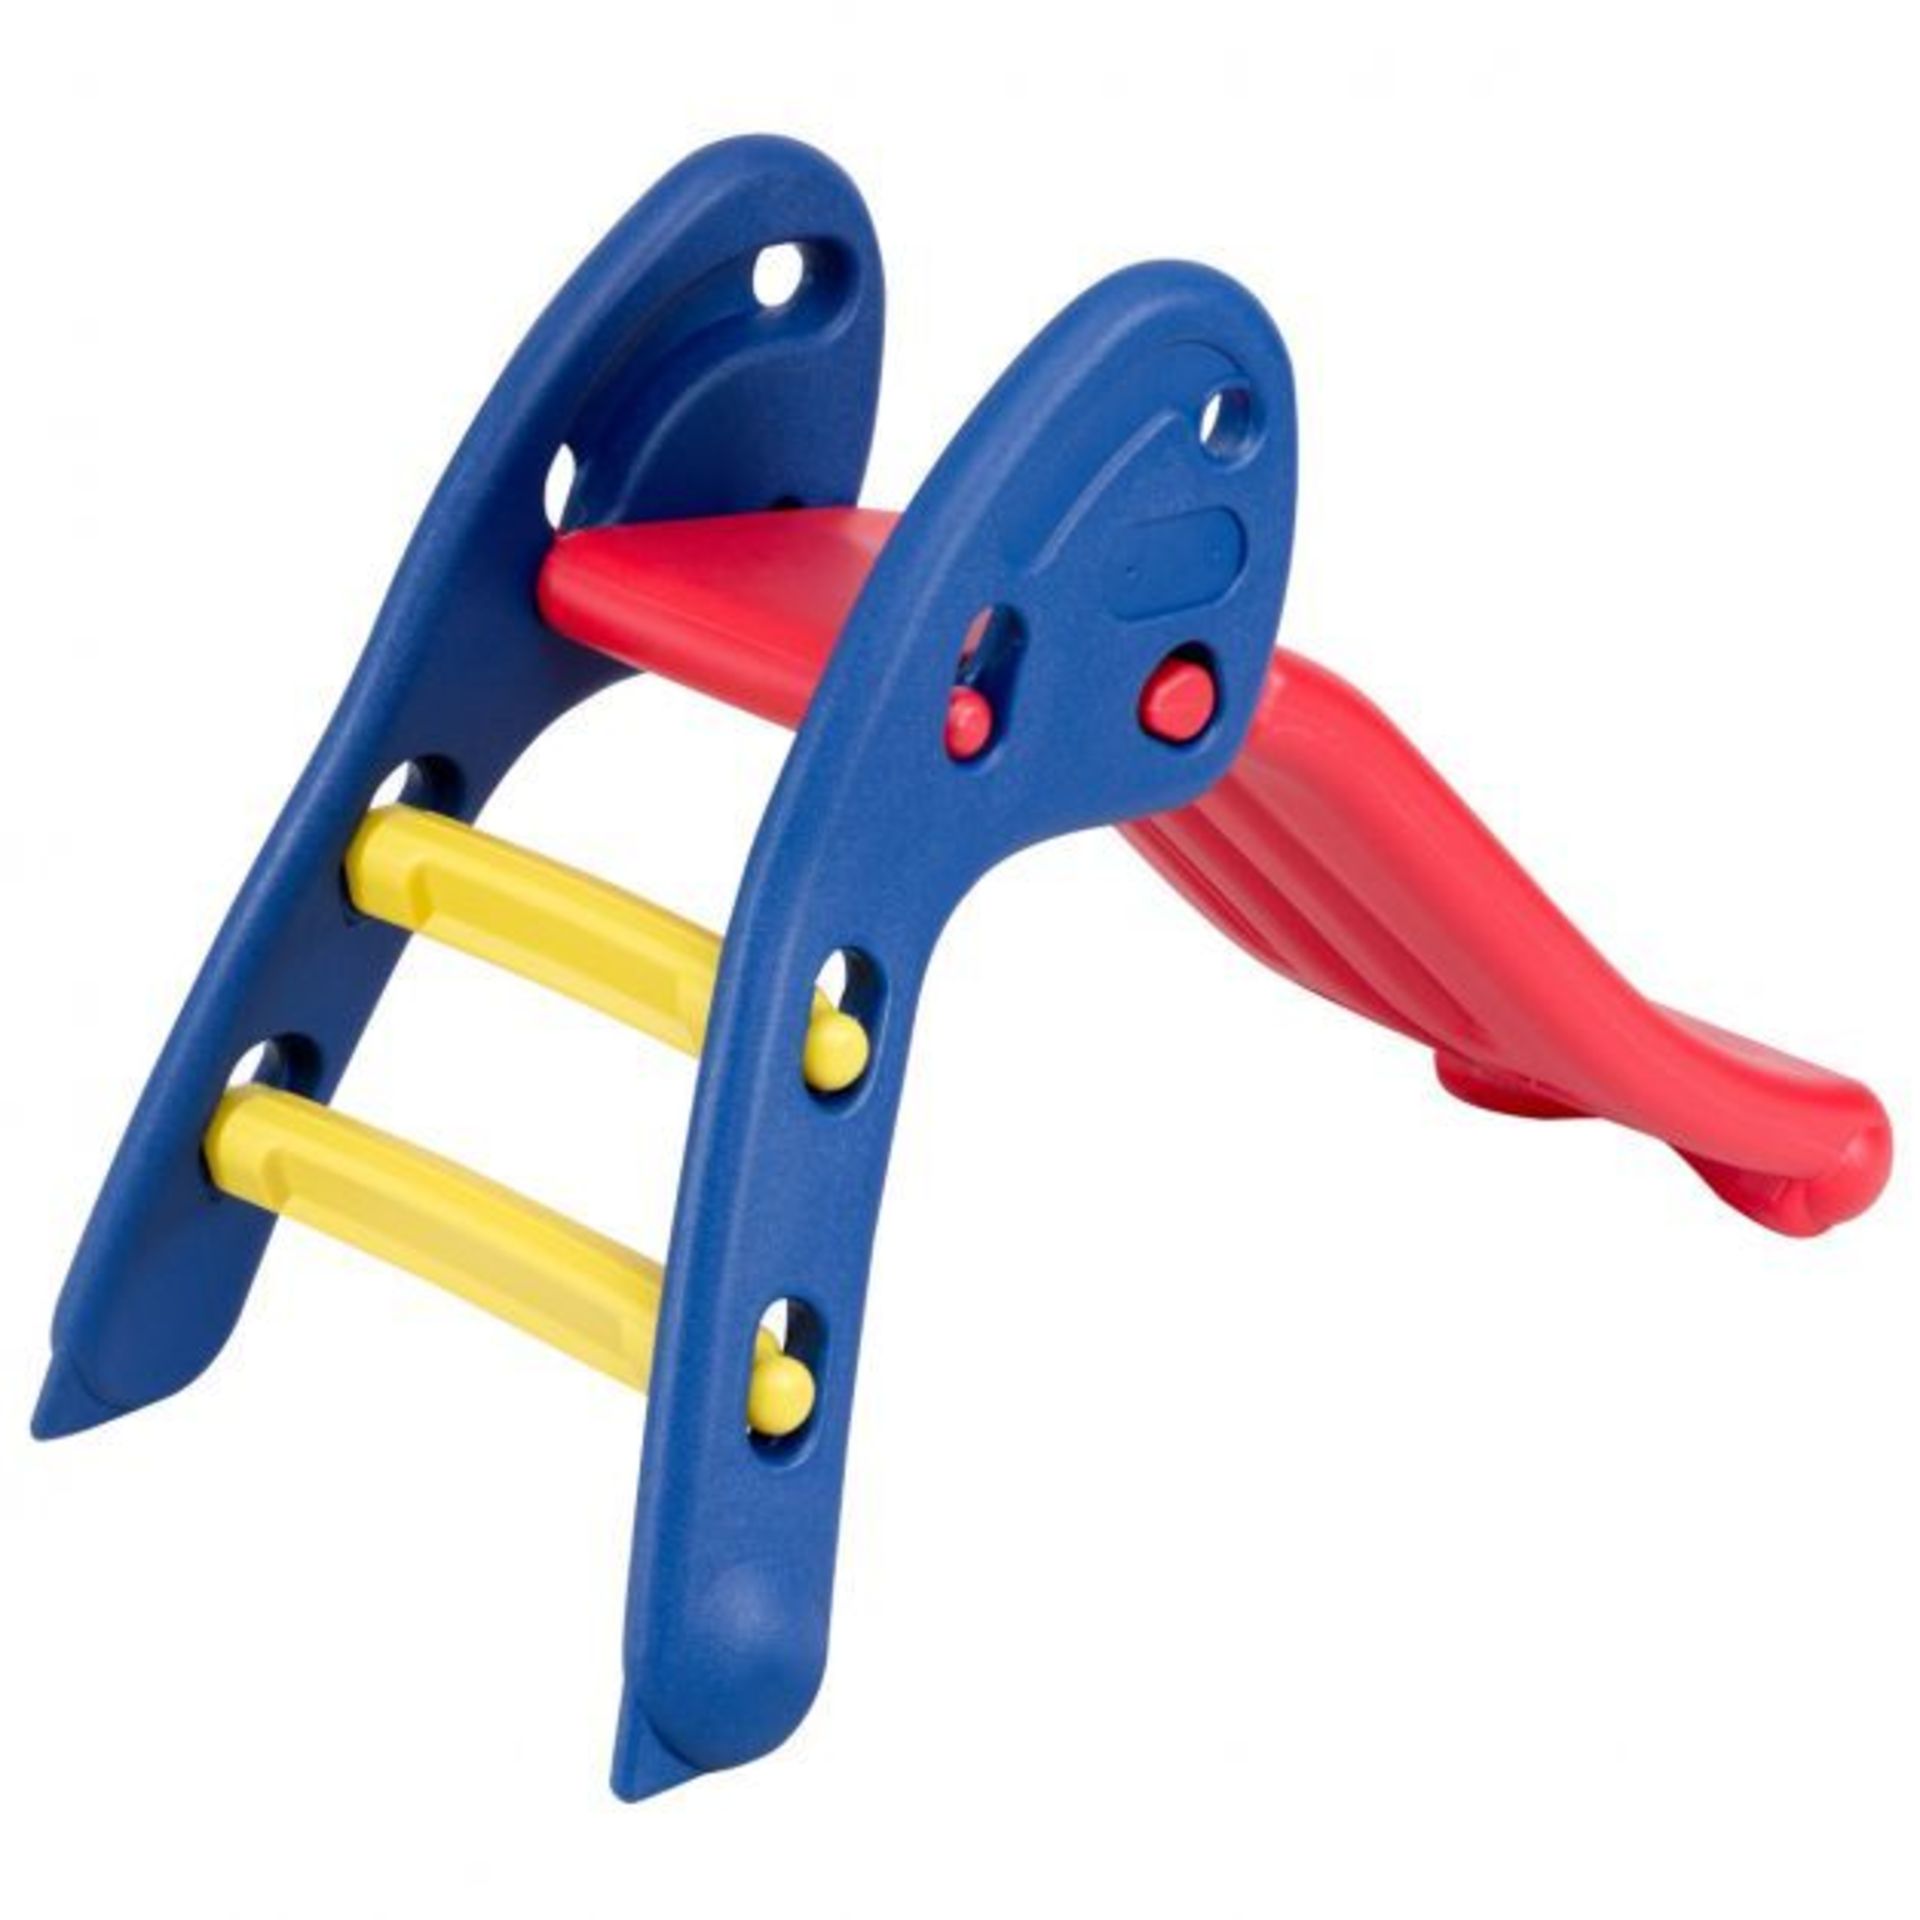 Folding Plastic Slide for Indoor and Outdoor Use. - ER53. Suitable for indoor and outdoor use,